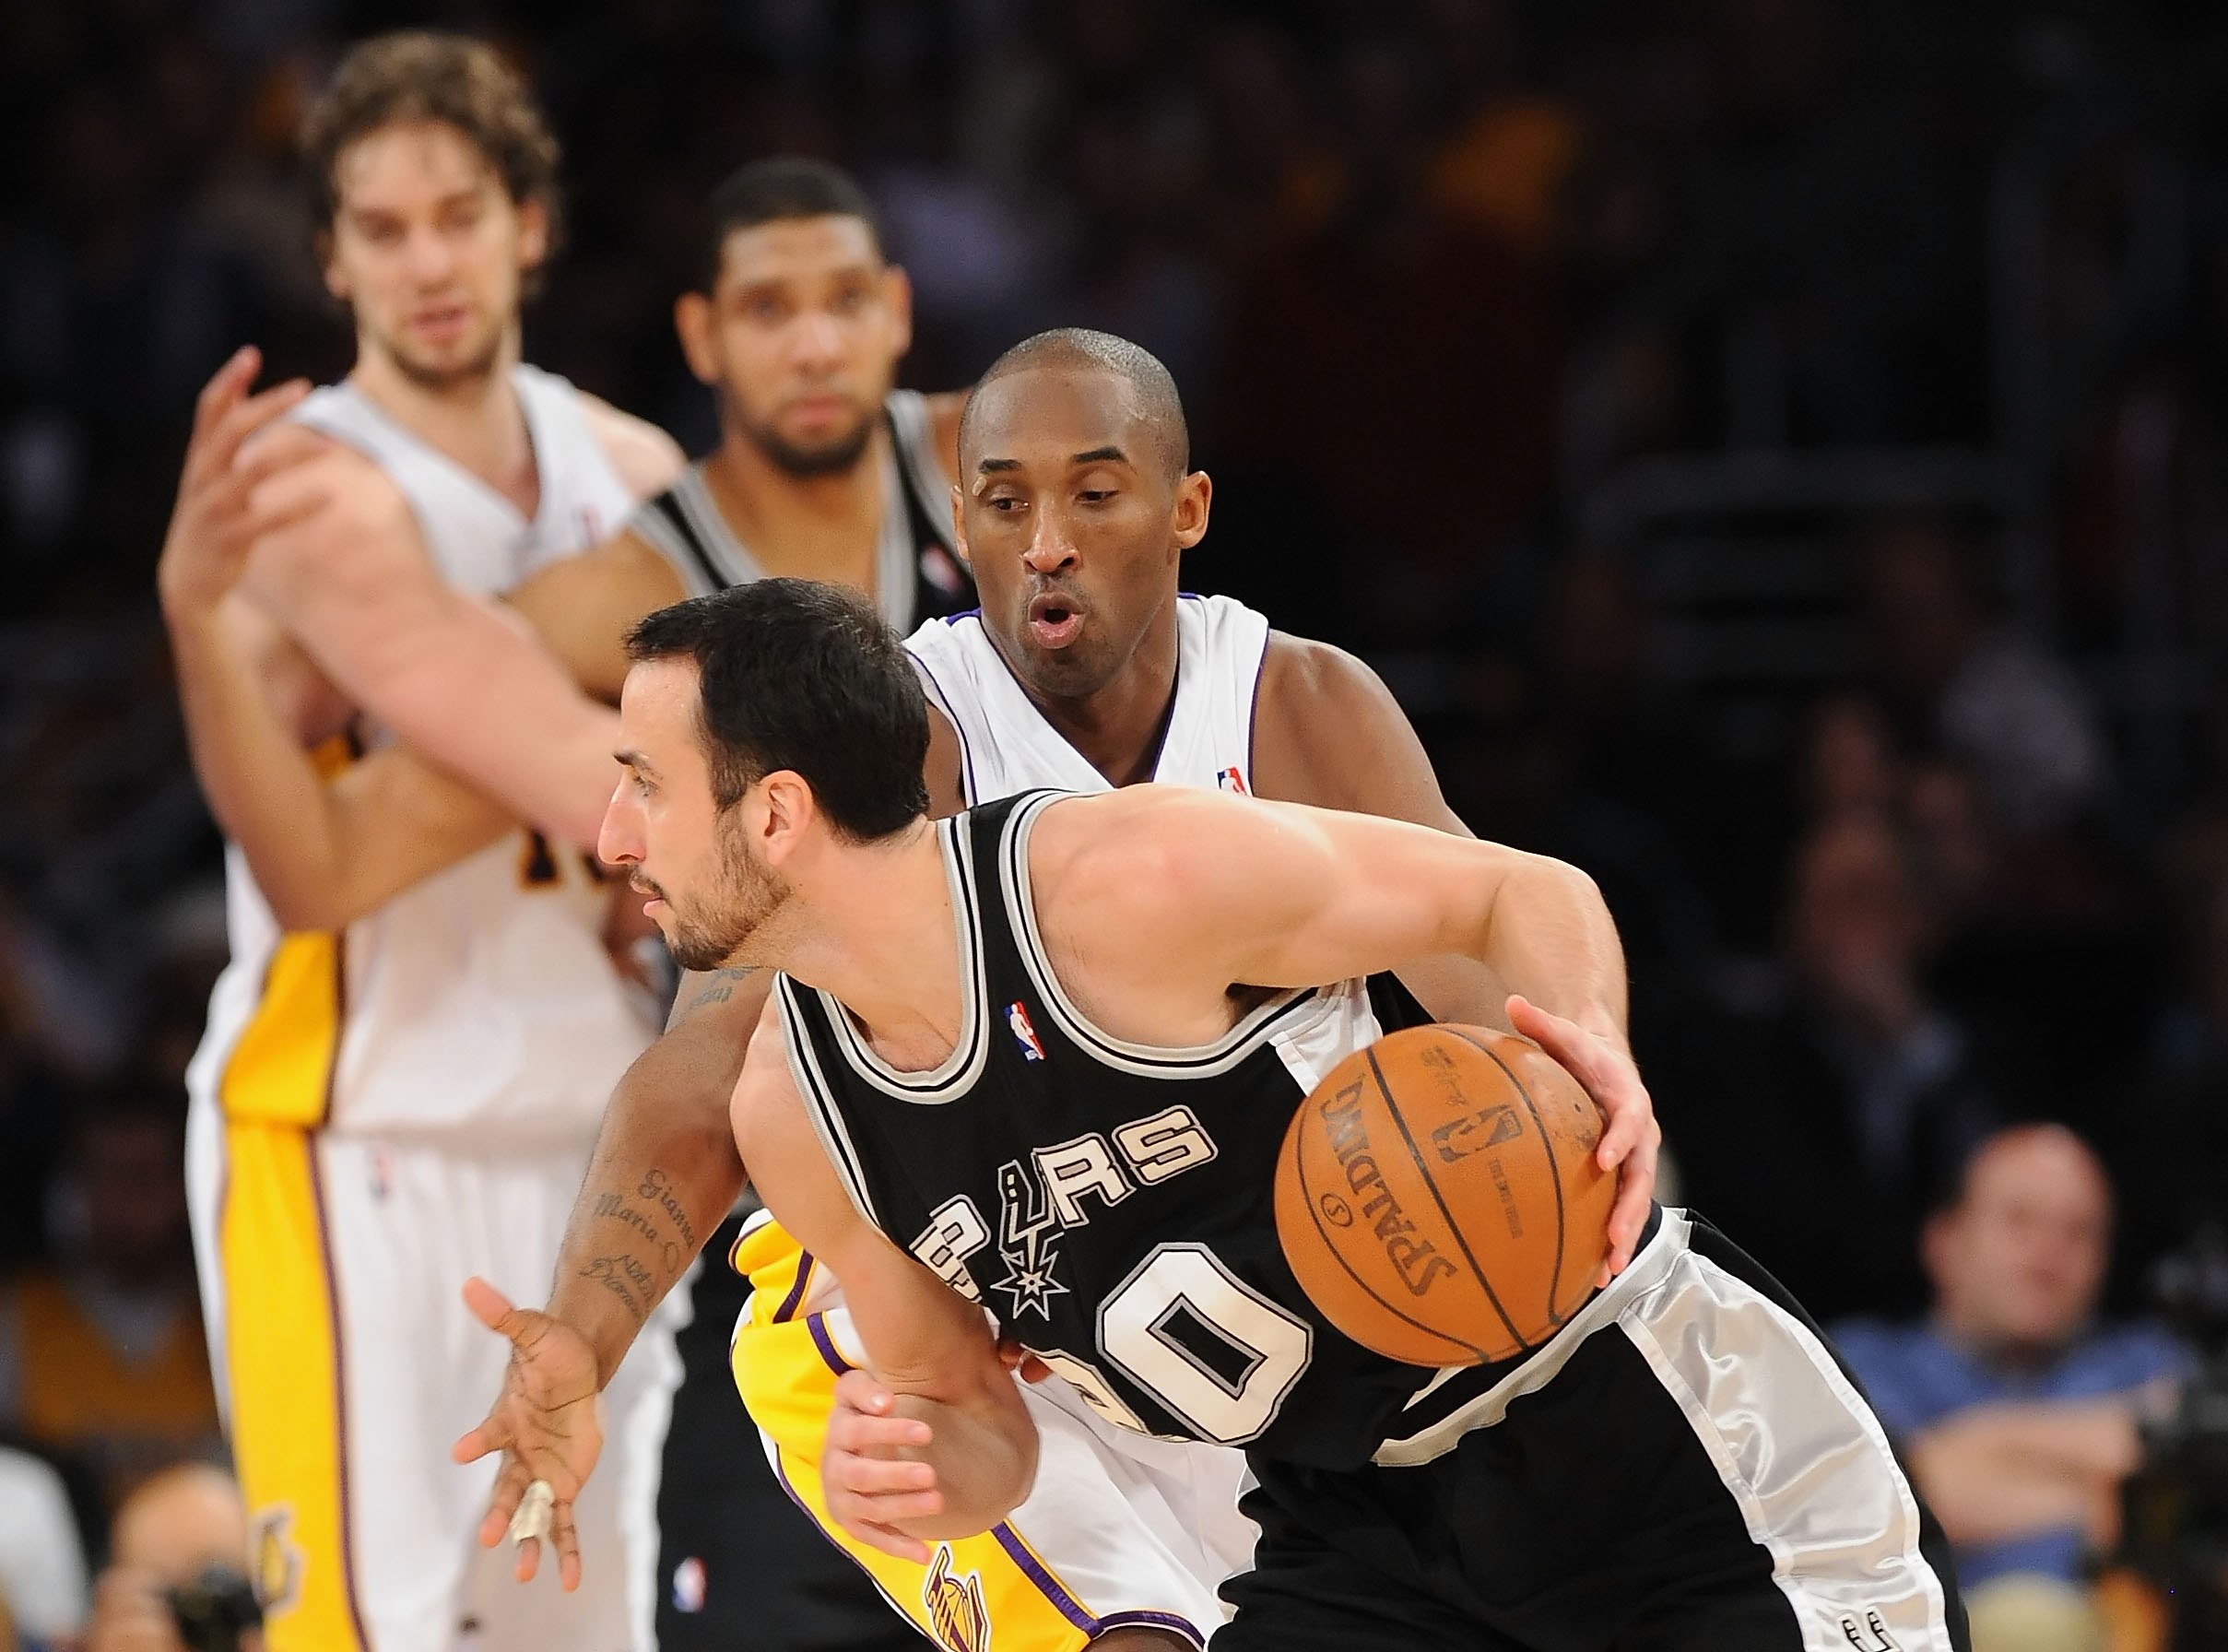 Los Angeles Lakers legend Kobe Bryant guards former San Antonio Spurs star Manu Ginobili during a game in January 2009